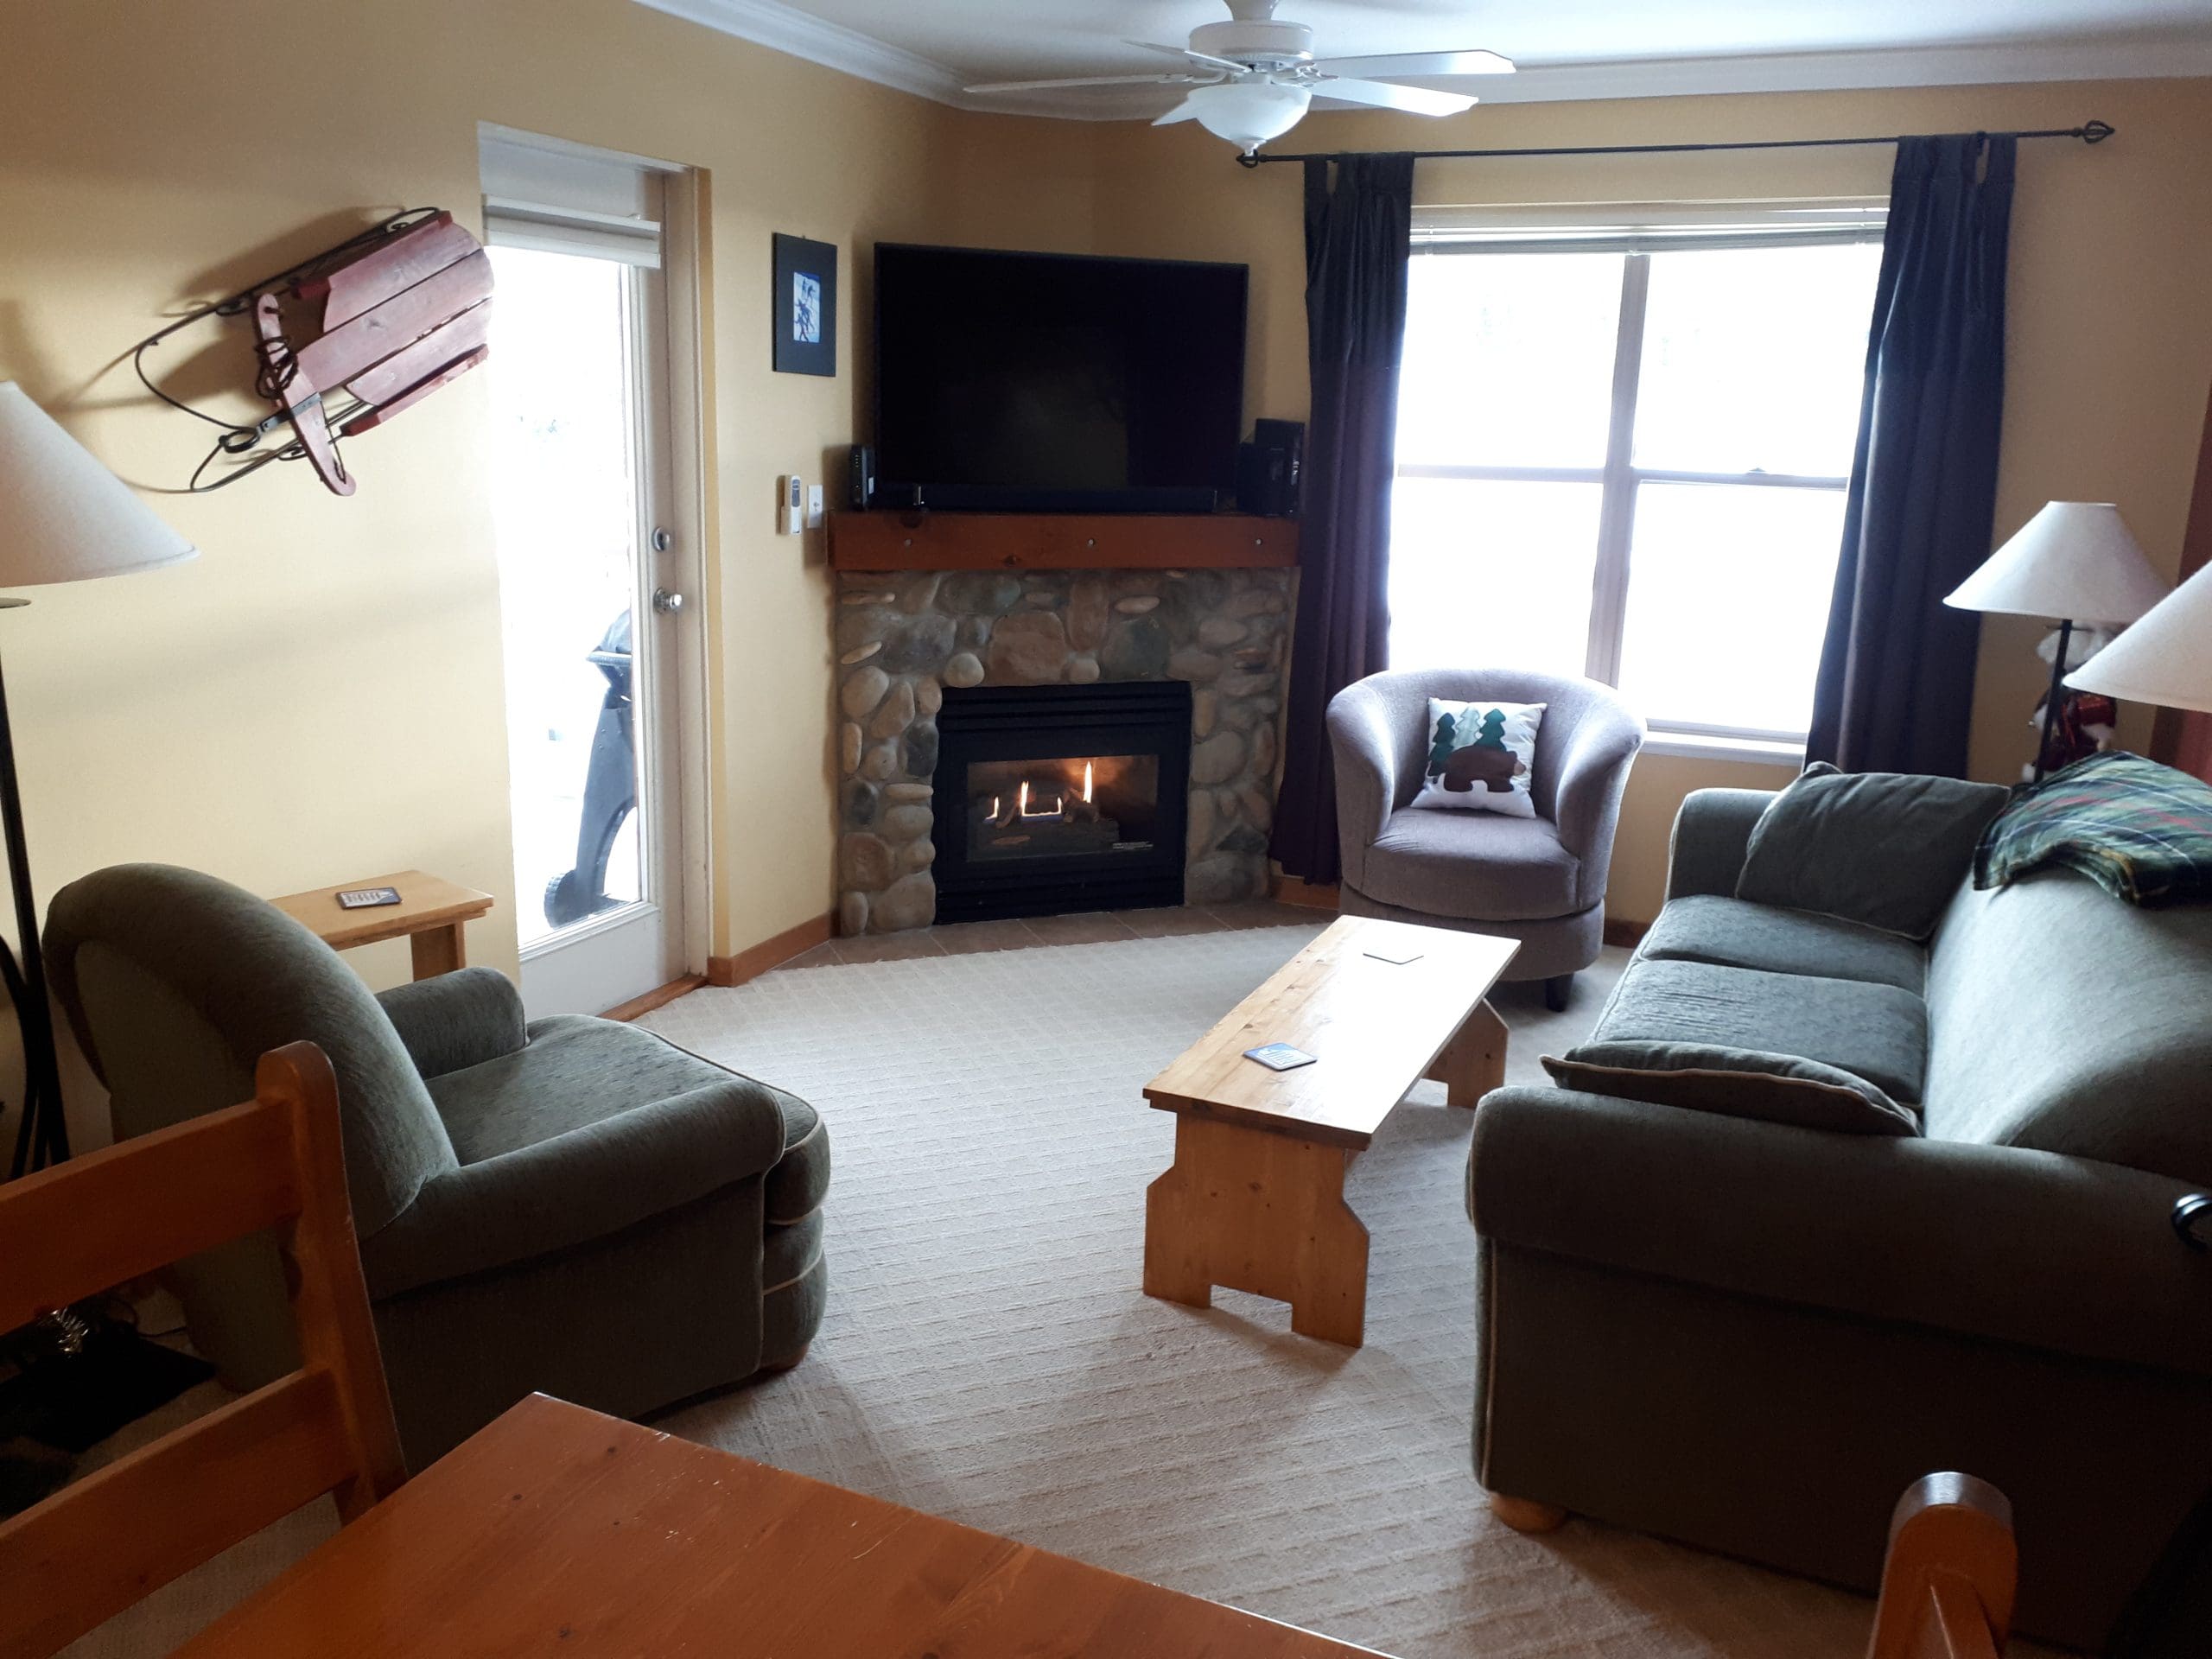 Living room of condo with gas fireplace, TV and bright windows. Top floor for ultimate quiet and a corner unit with large balcony and BBQ. Pet-friendly, free parking and great views of the Adventure Park.